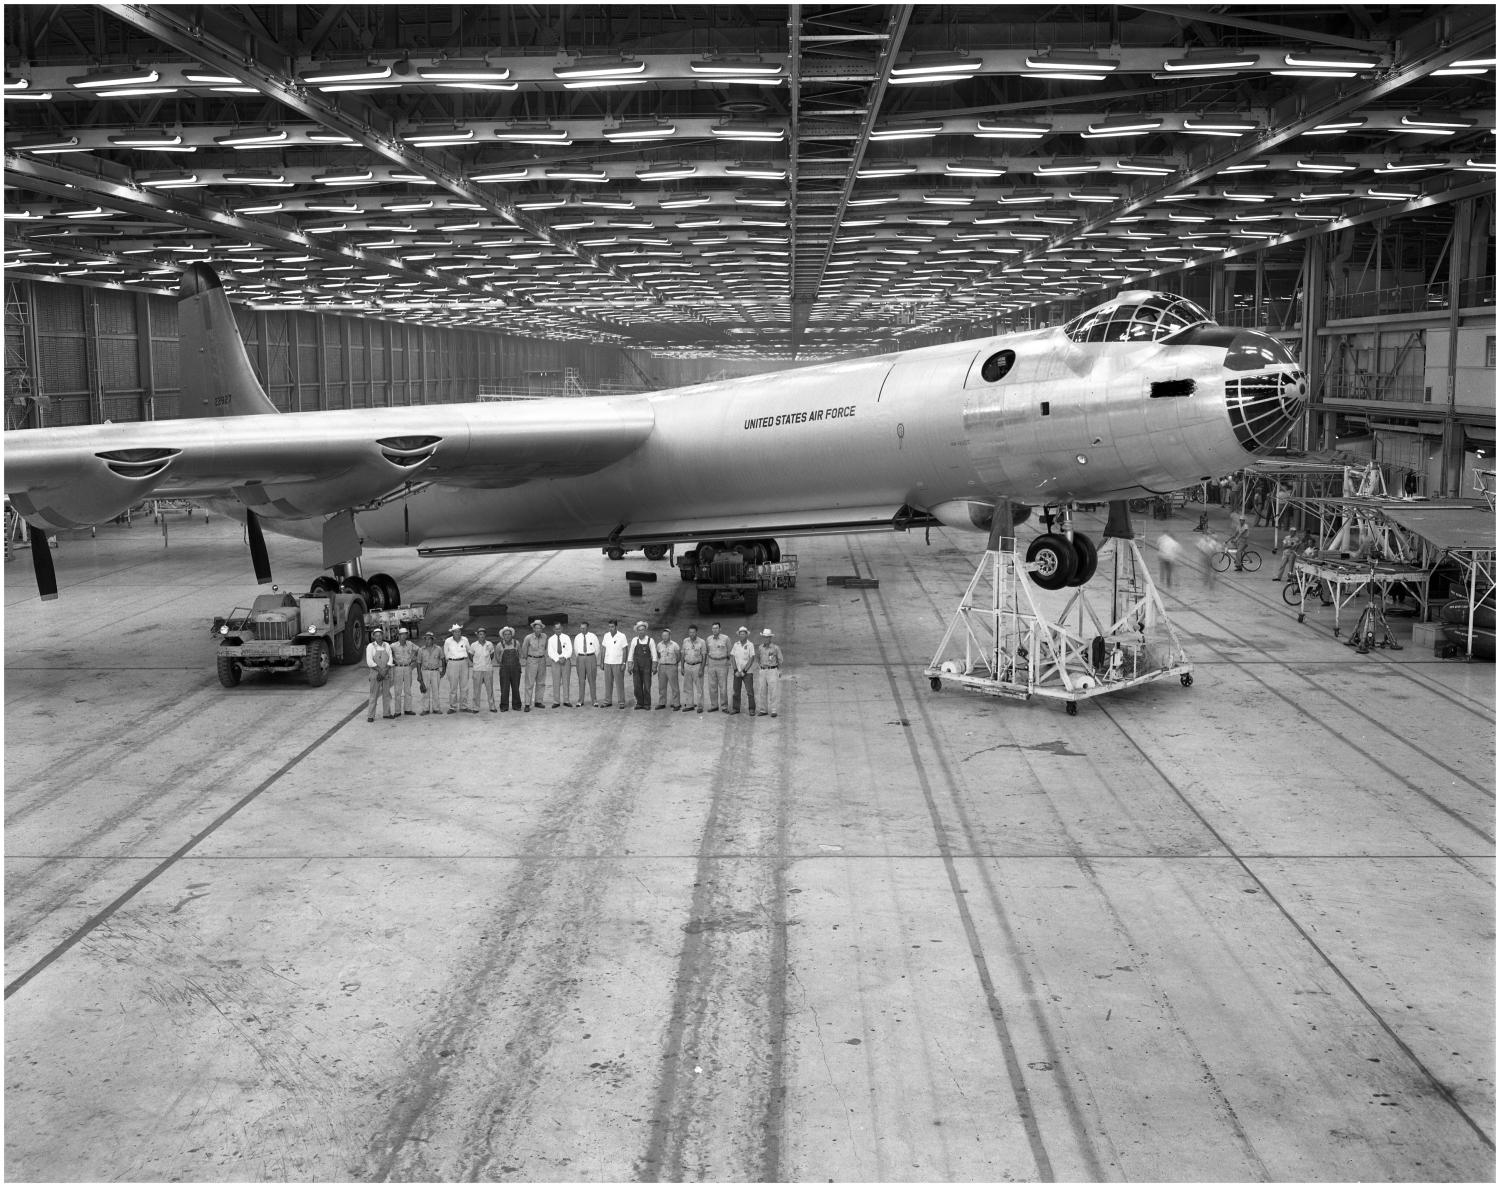 Flight Journal - Aviation History | On this Day: The Last Peacemaker